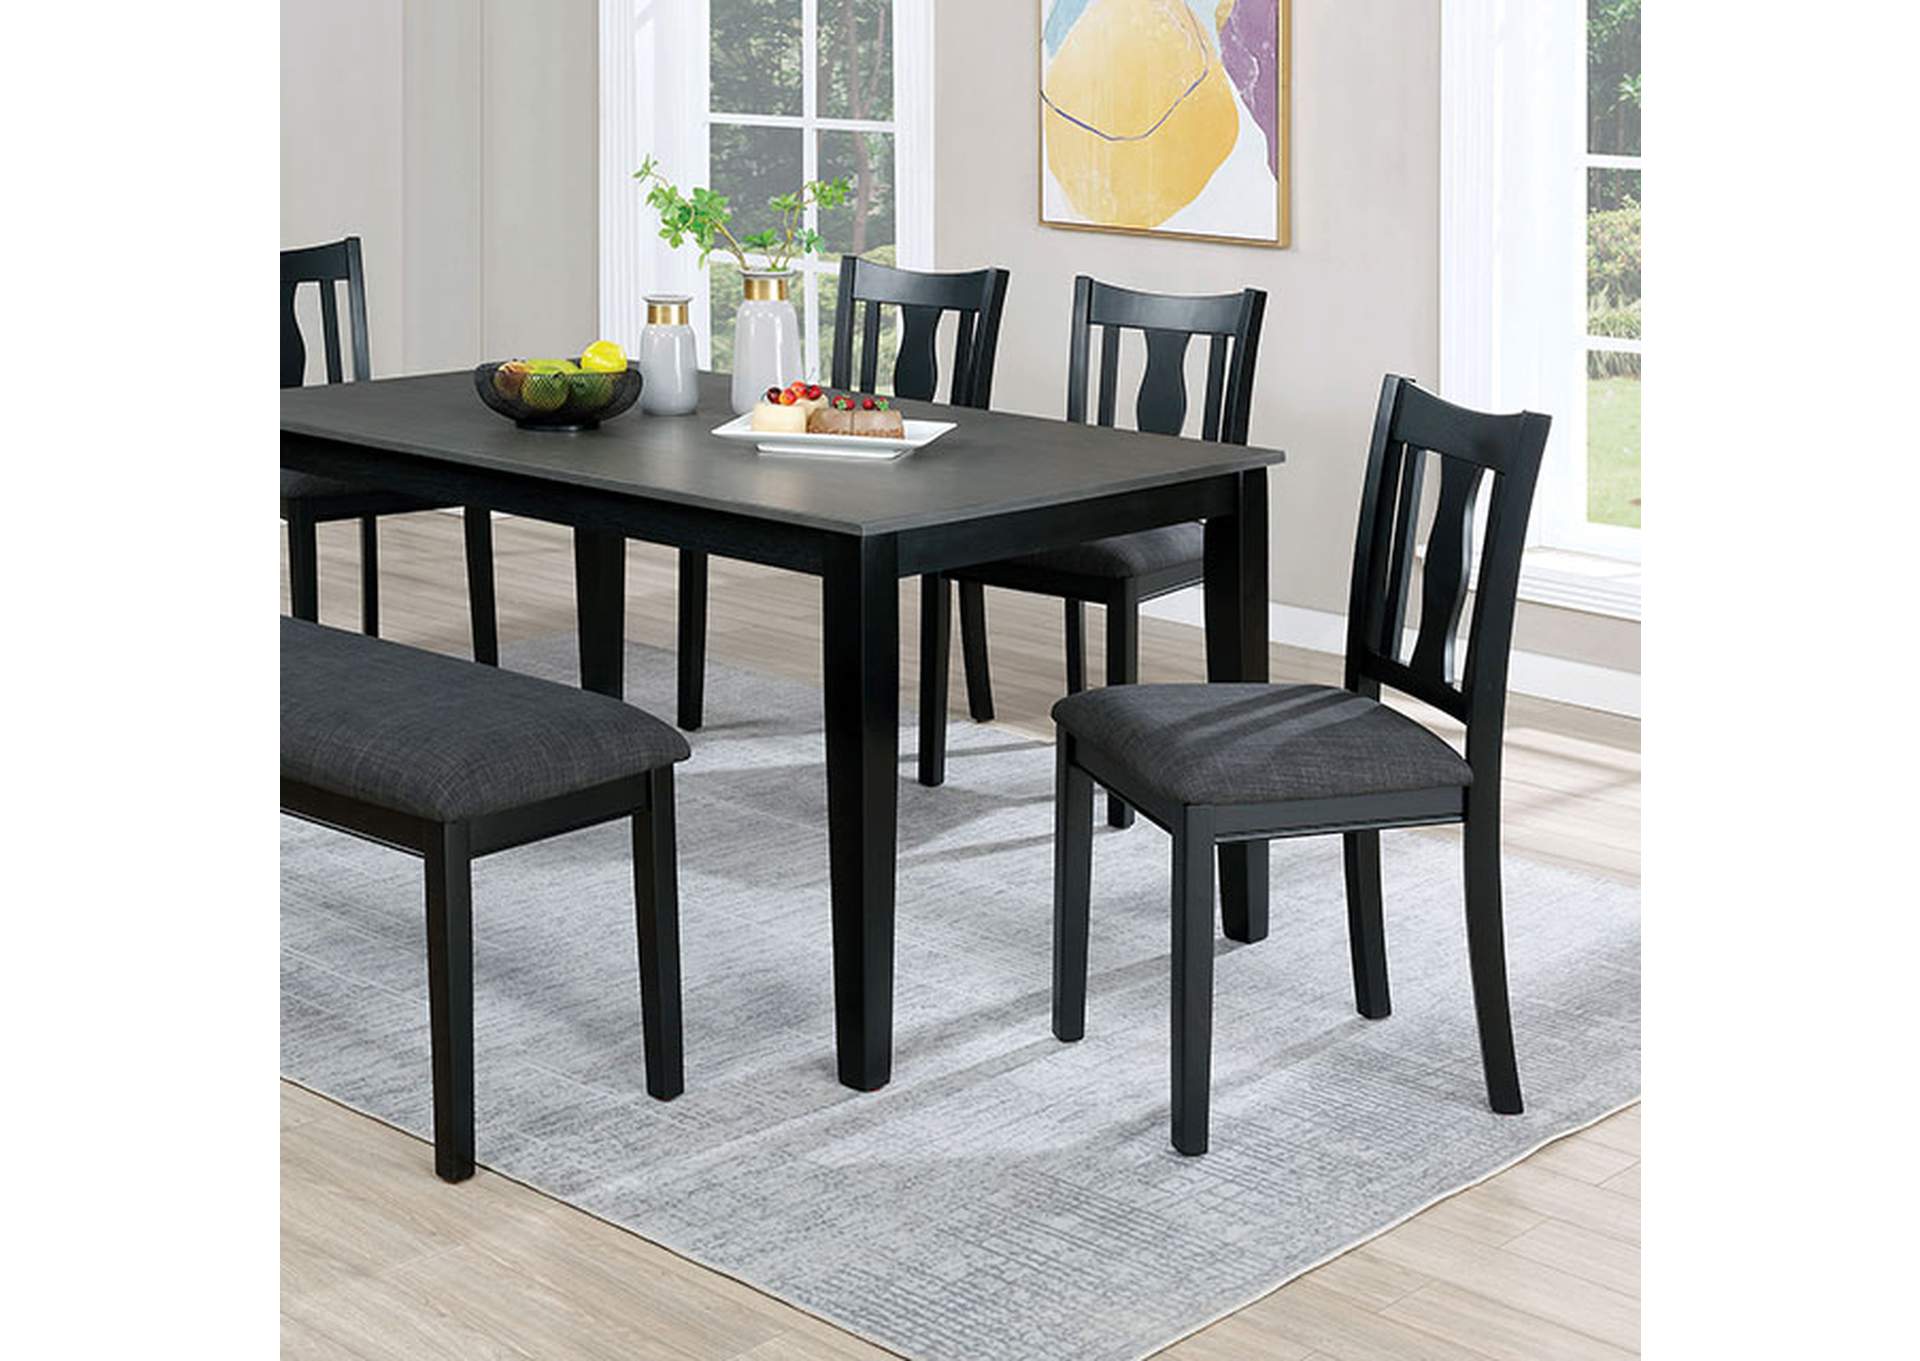 Carbey 5 Pc. Dining Table Set,Furniture of America